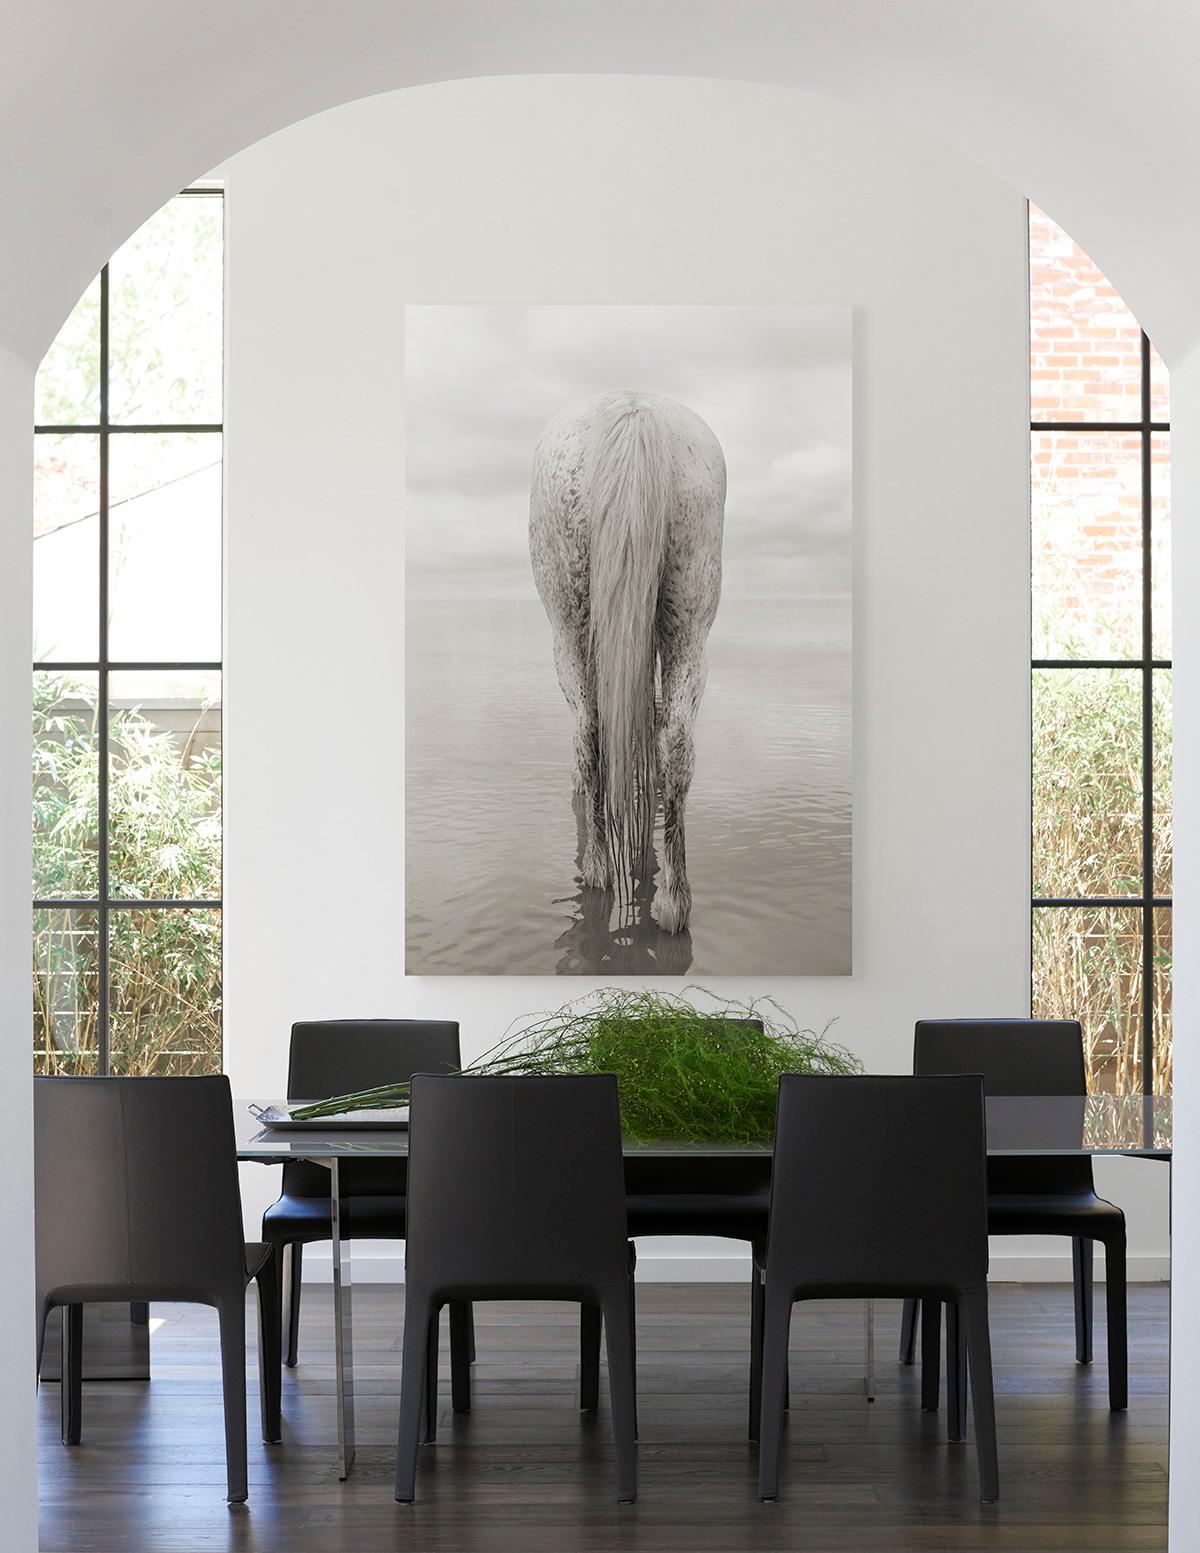 Portrait of an All-White Horse in Camargue, France, Vertical, Ethereal - Contemporary Photograph by Drew Doggett